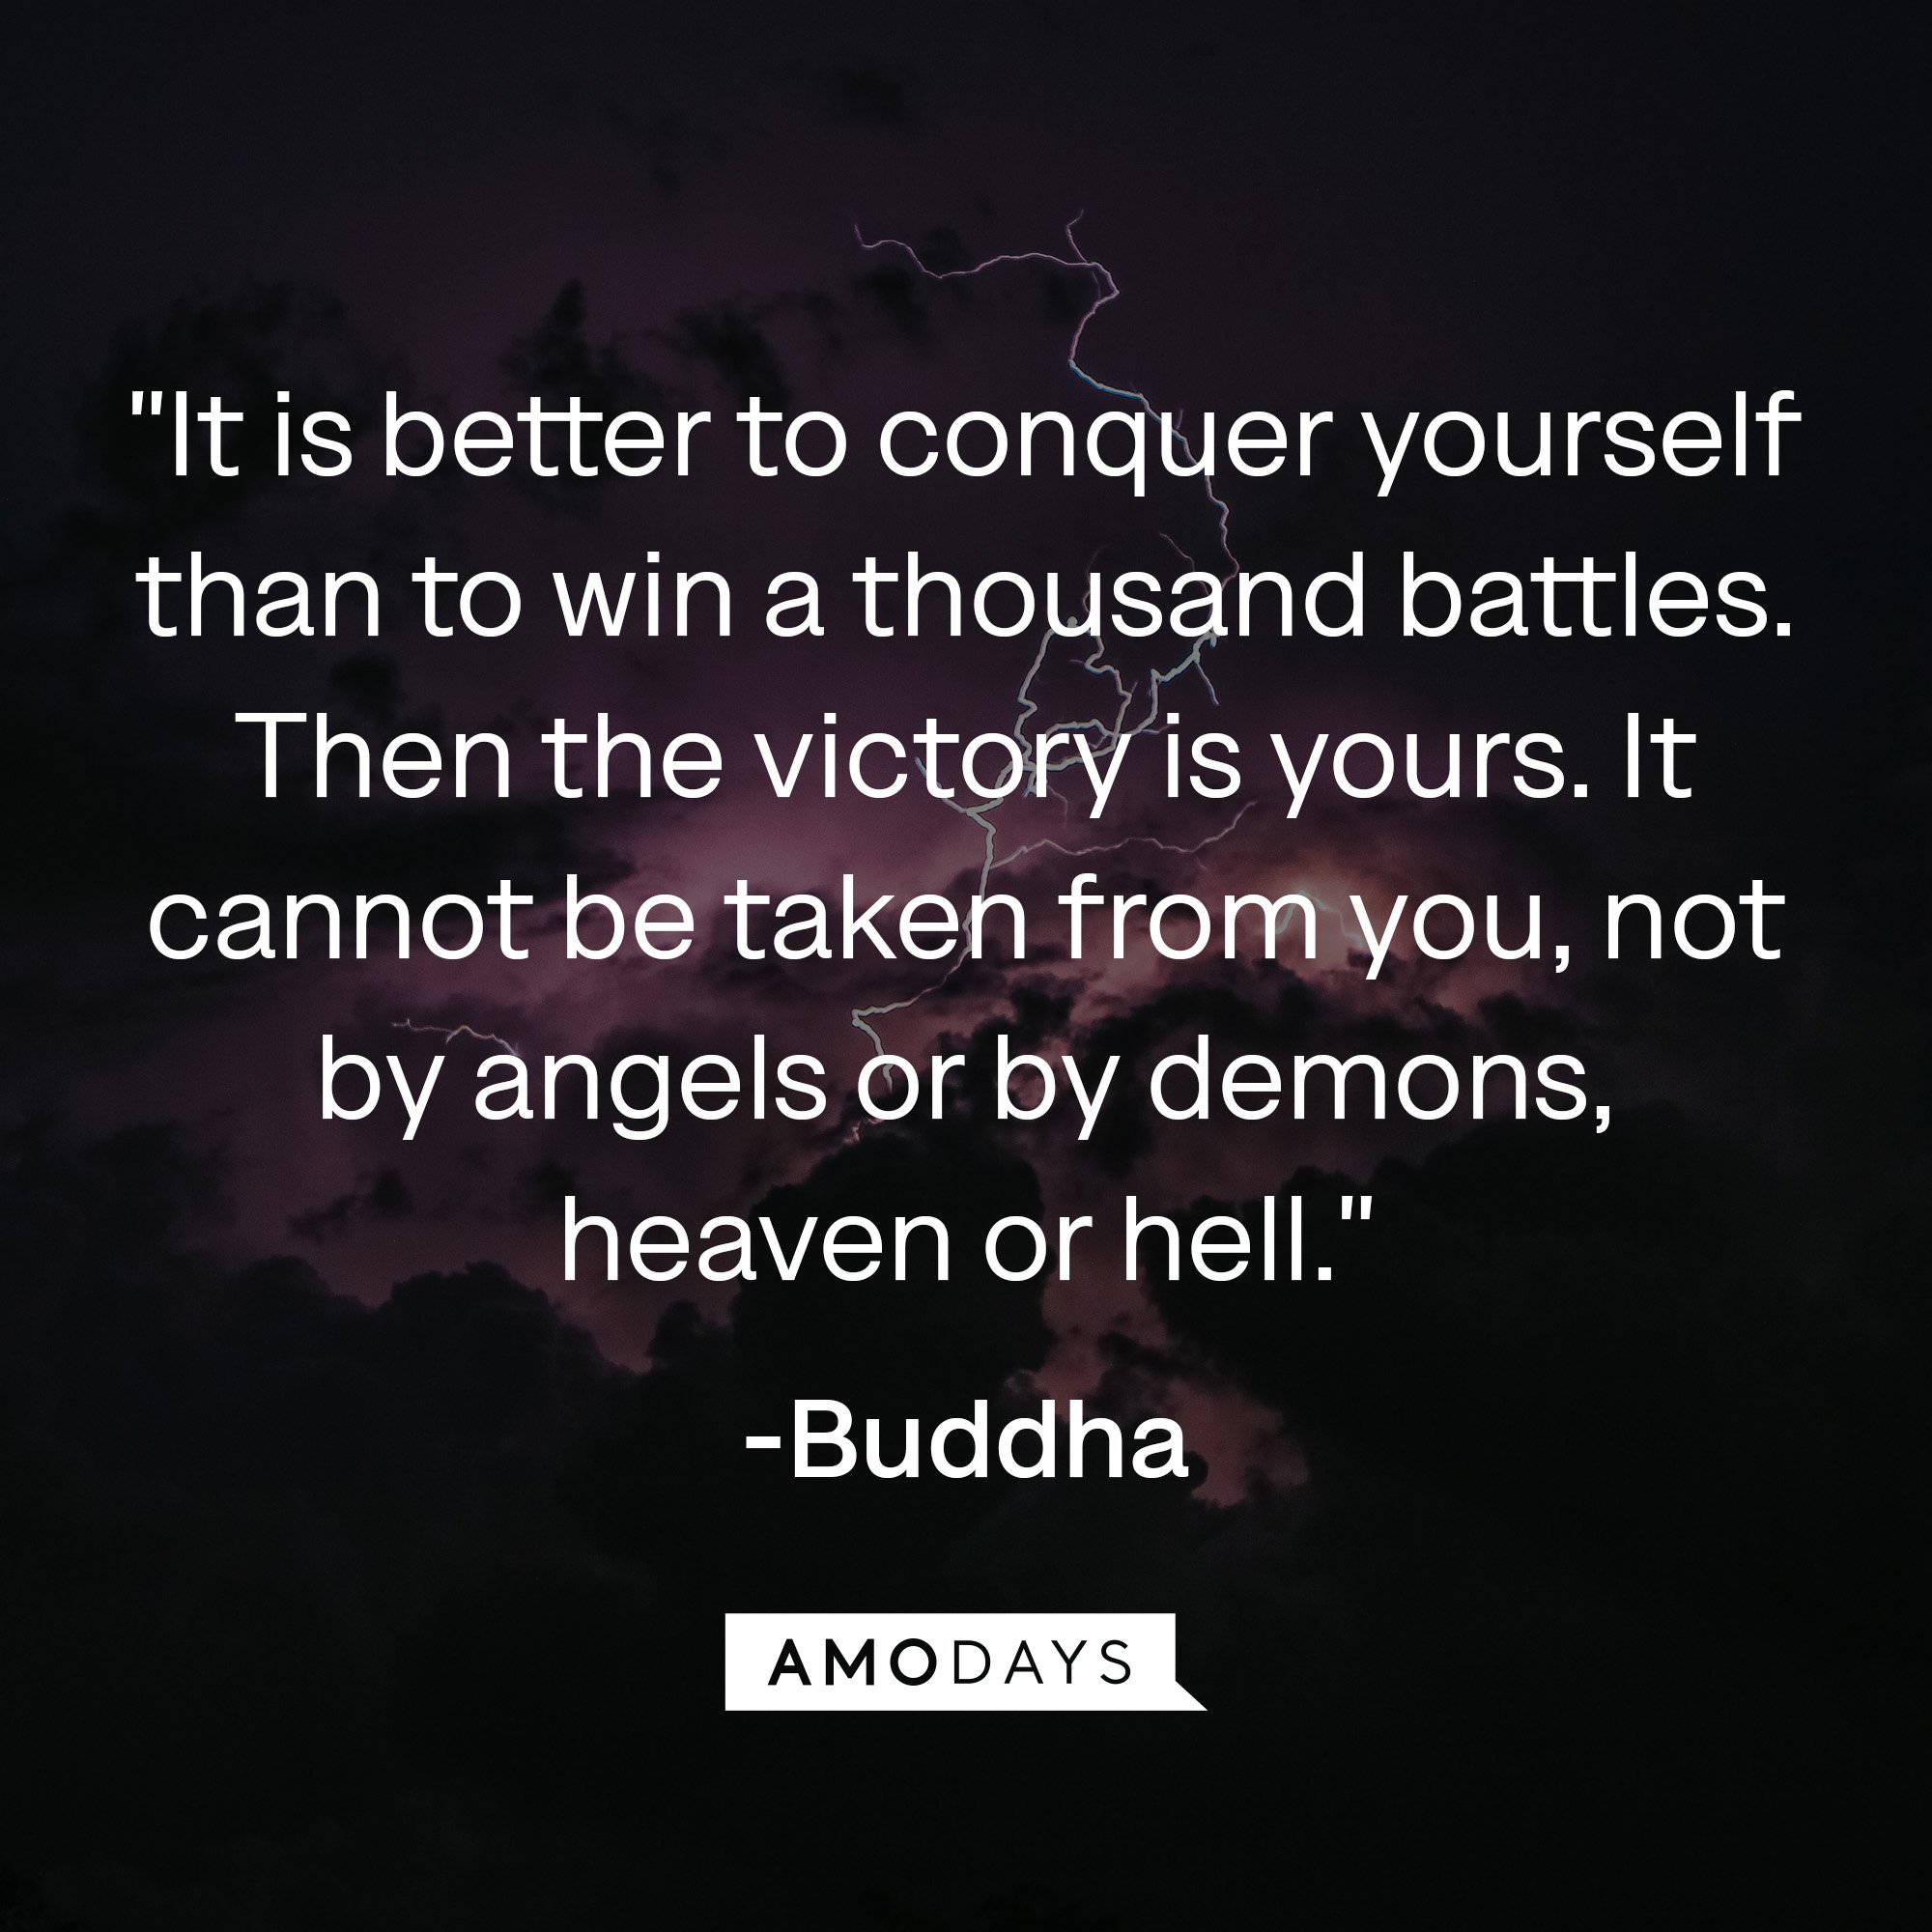 Buddha’s quote: "It is better to conquer yourself than to win a thousand battles. Then the victory is yours. It cannot be taken from you, not by angels or by demons, heaven or hell." | Image: AmoDays